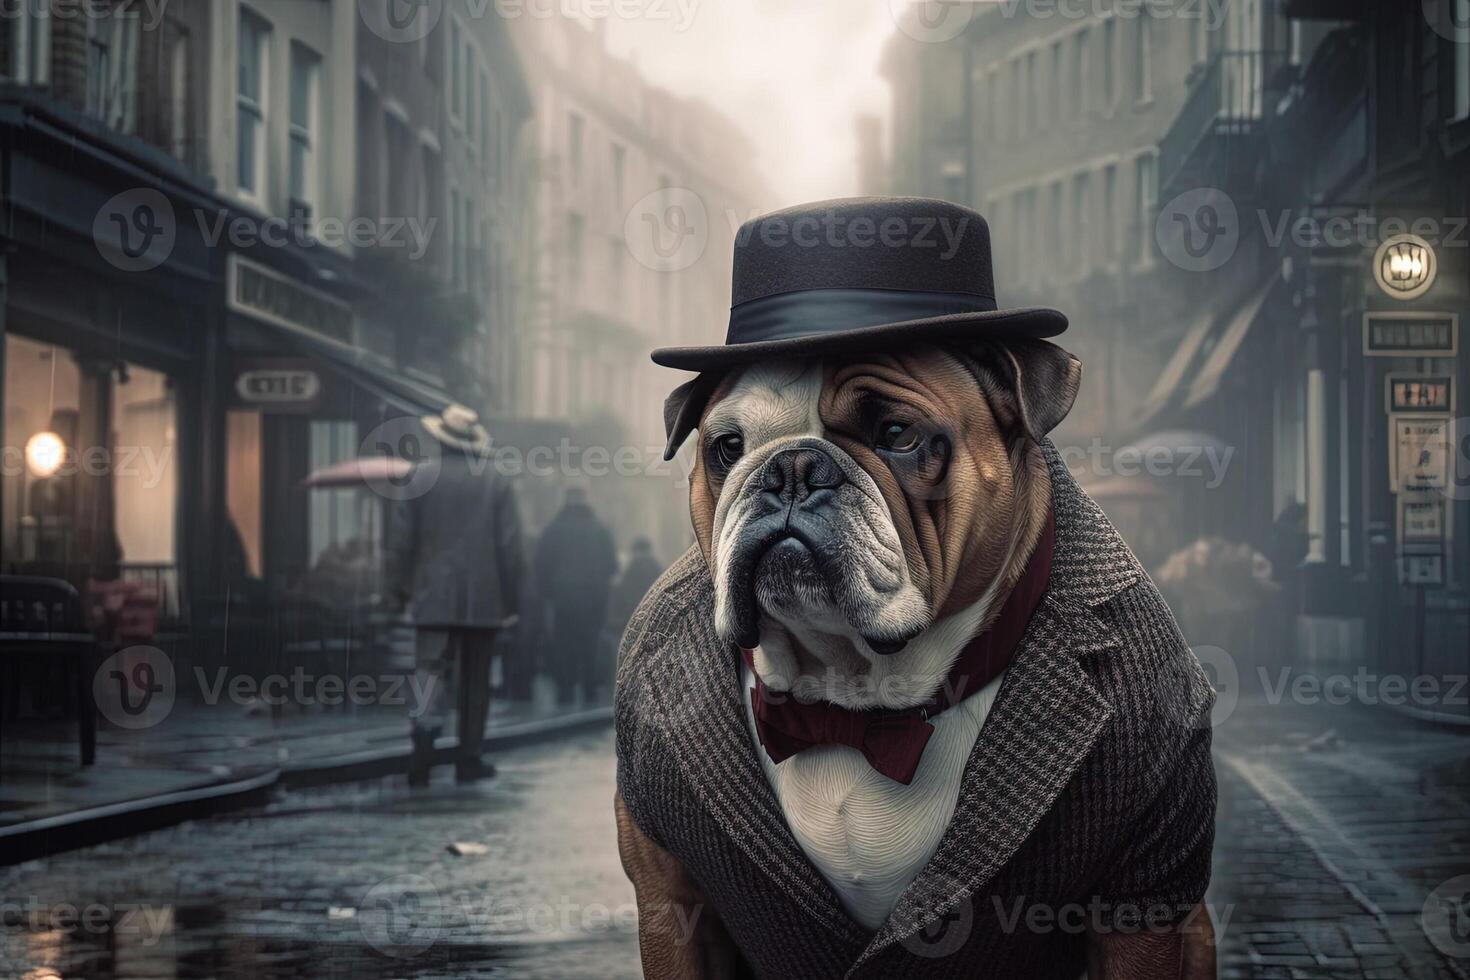 Stoic - looking bulldog, wearing a bowler hat and a three - piece suit, holding a cane and standing on a foggy London street corner illustration photo